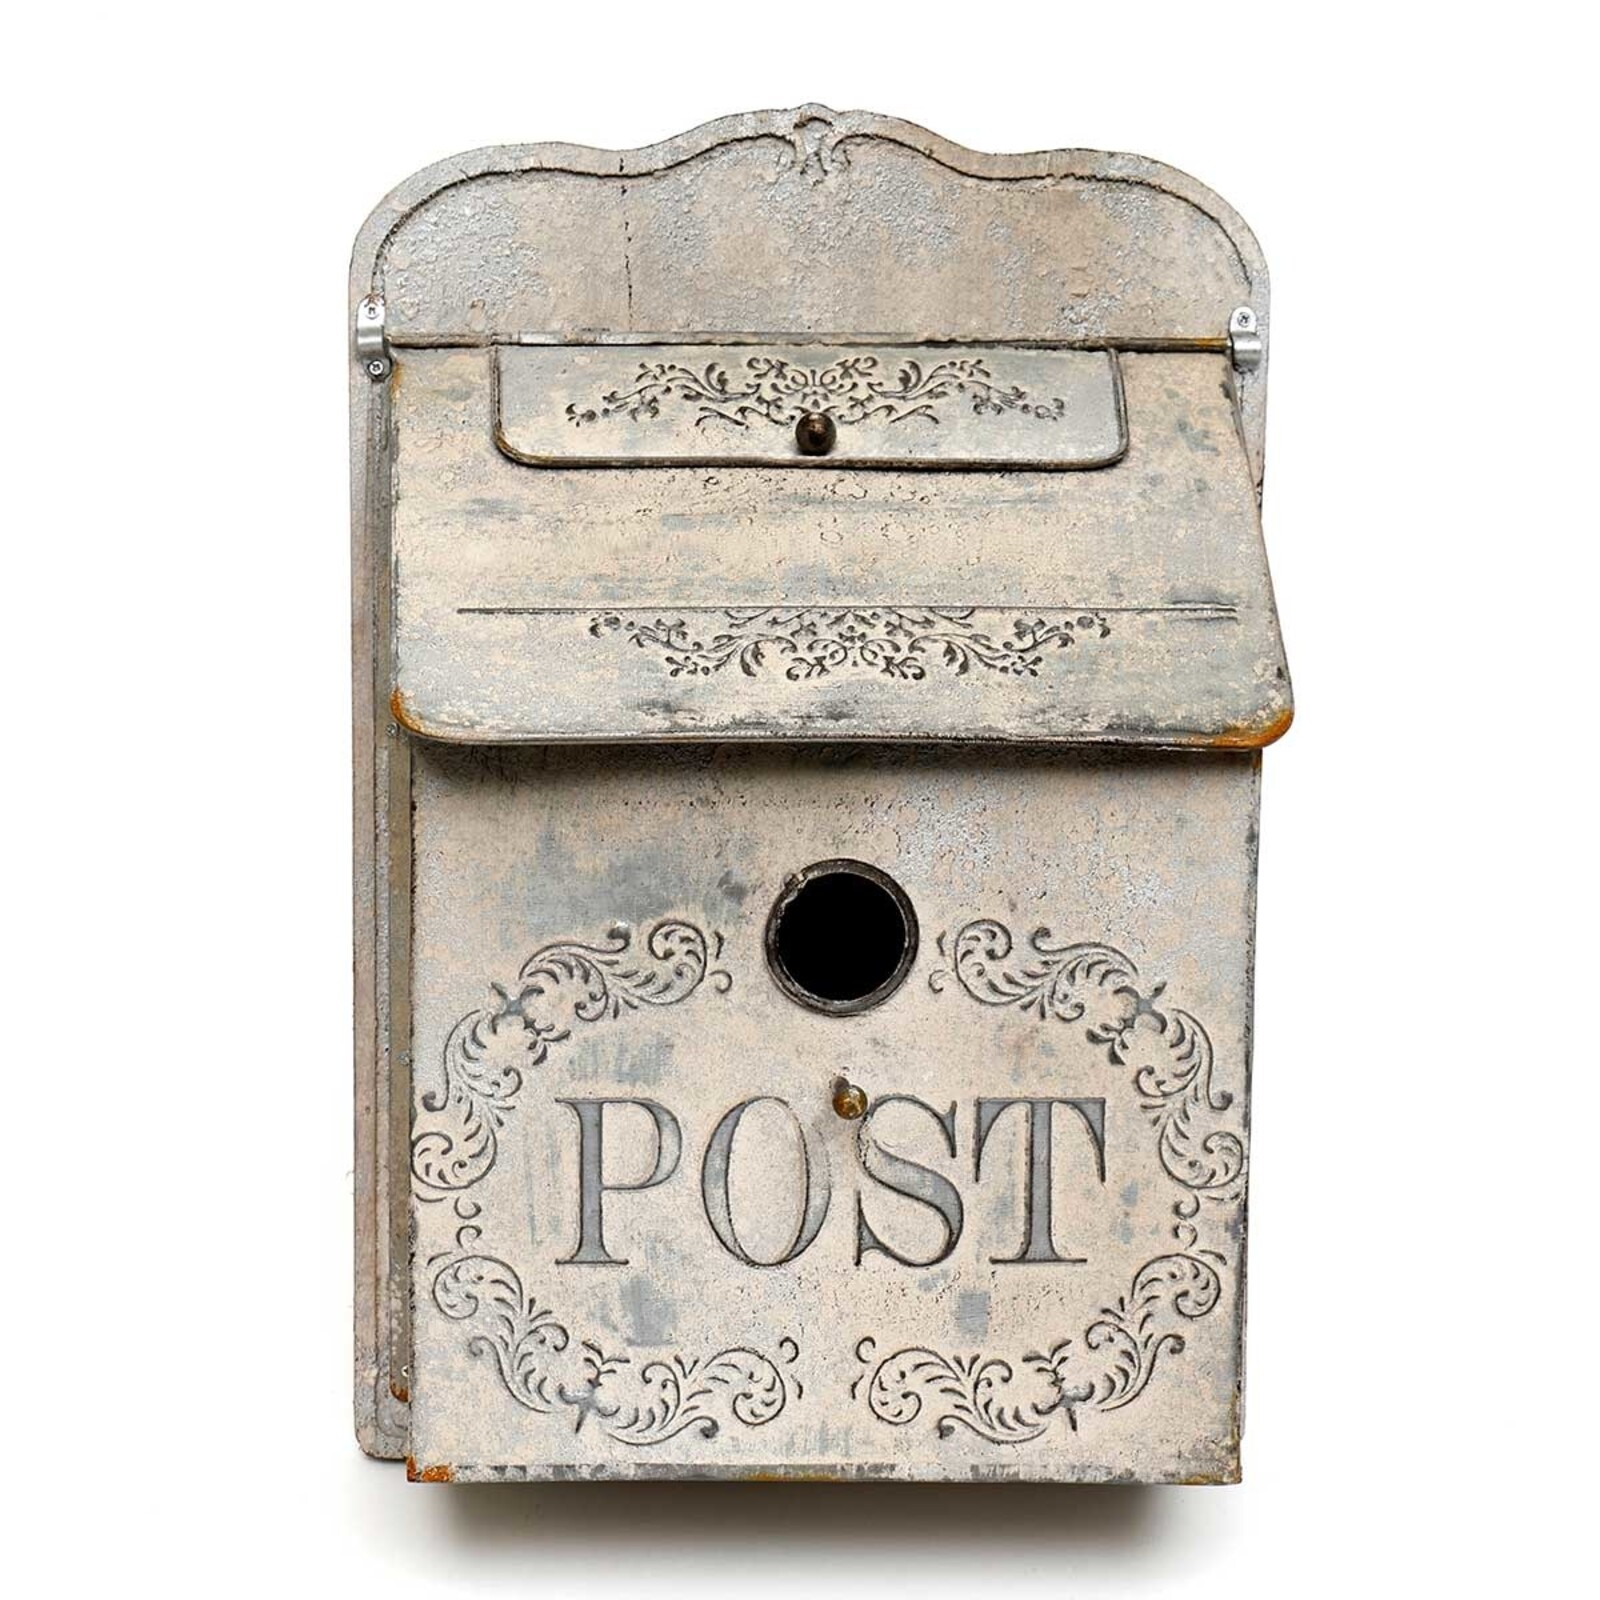 Meravic PEWTER METAL PROVENCE POSTBOX BIRDHOUSE  A2684 loading=